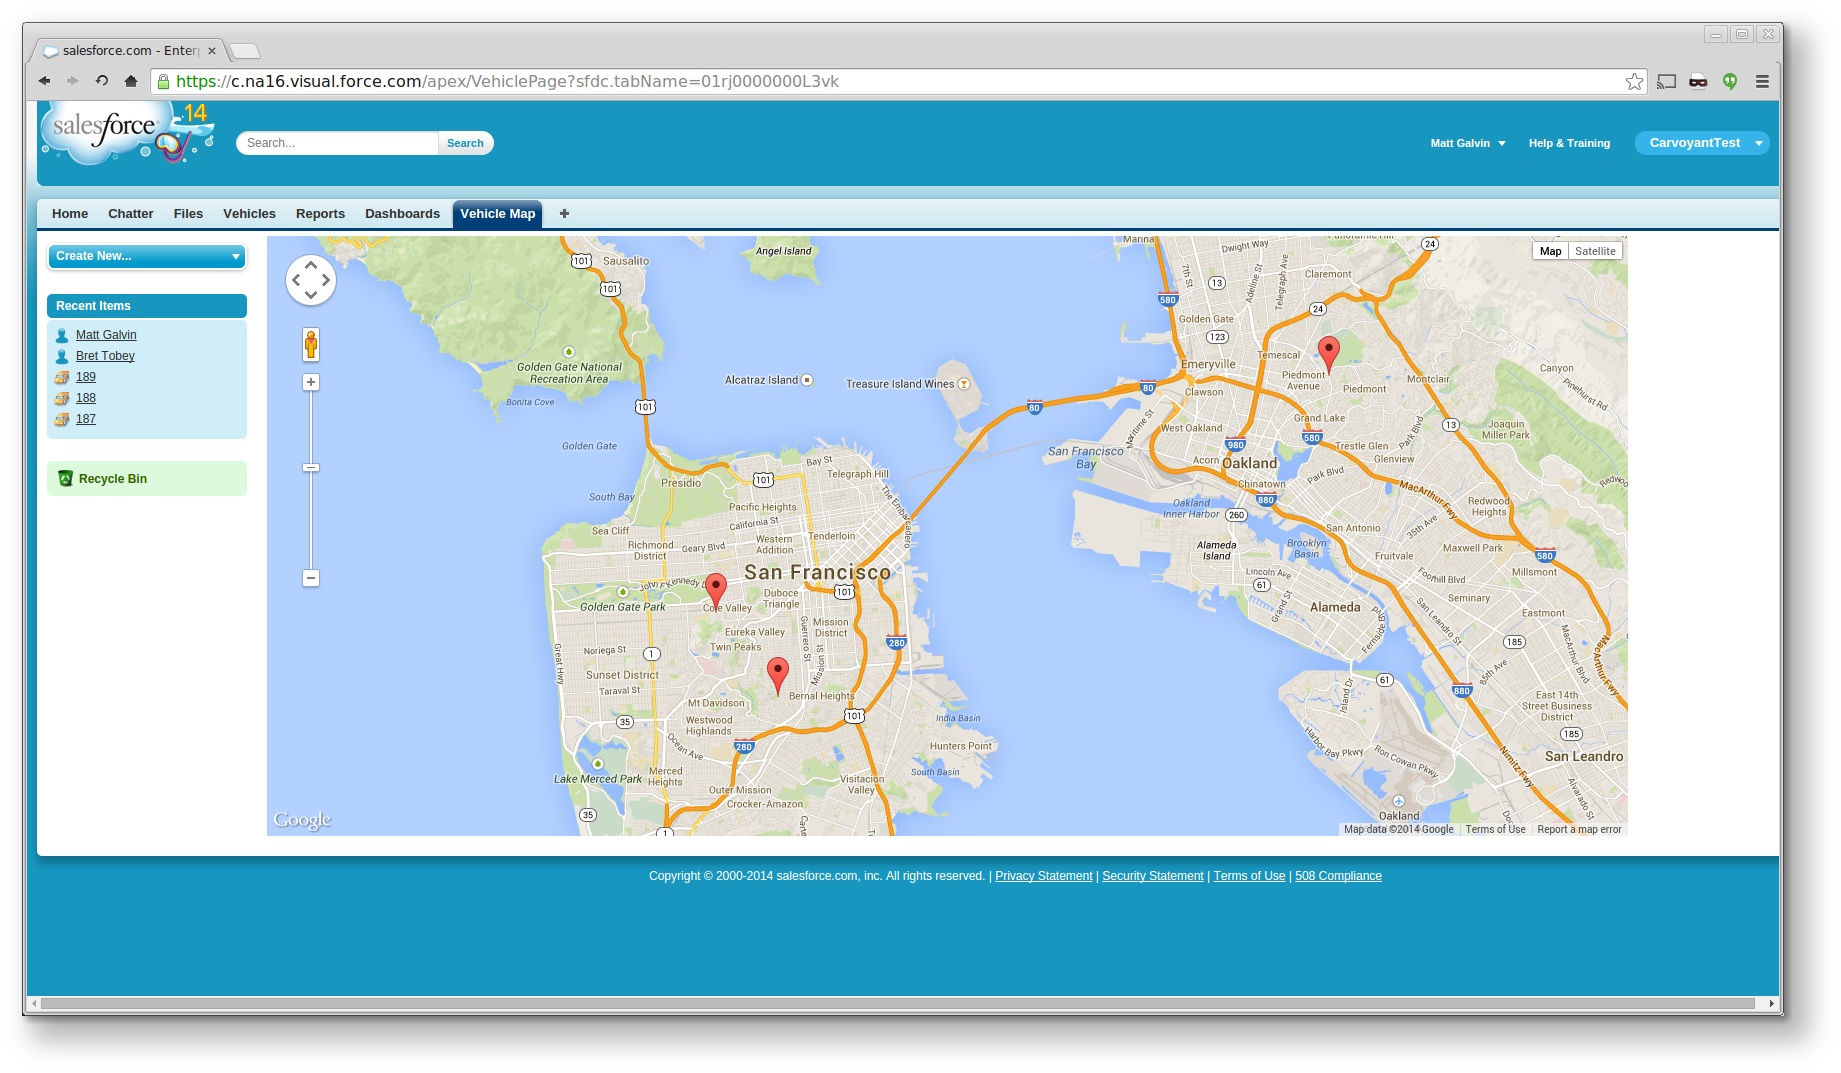 ../../_images/salesforce-vehiclemap.png